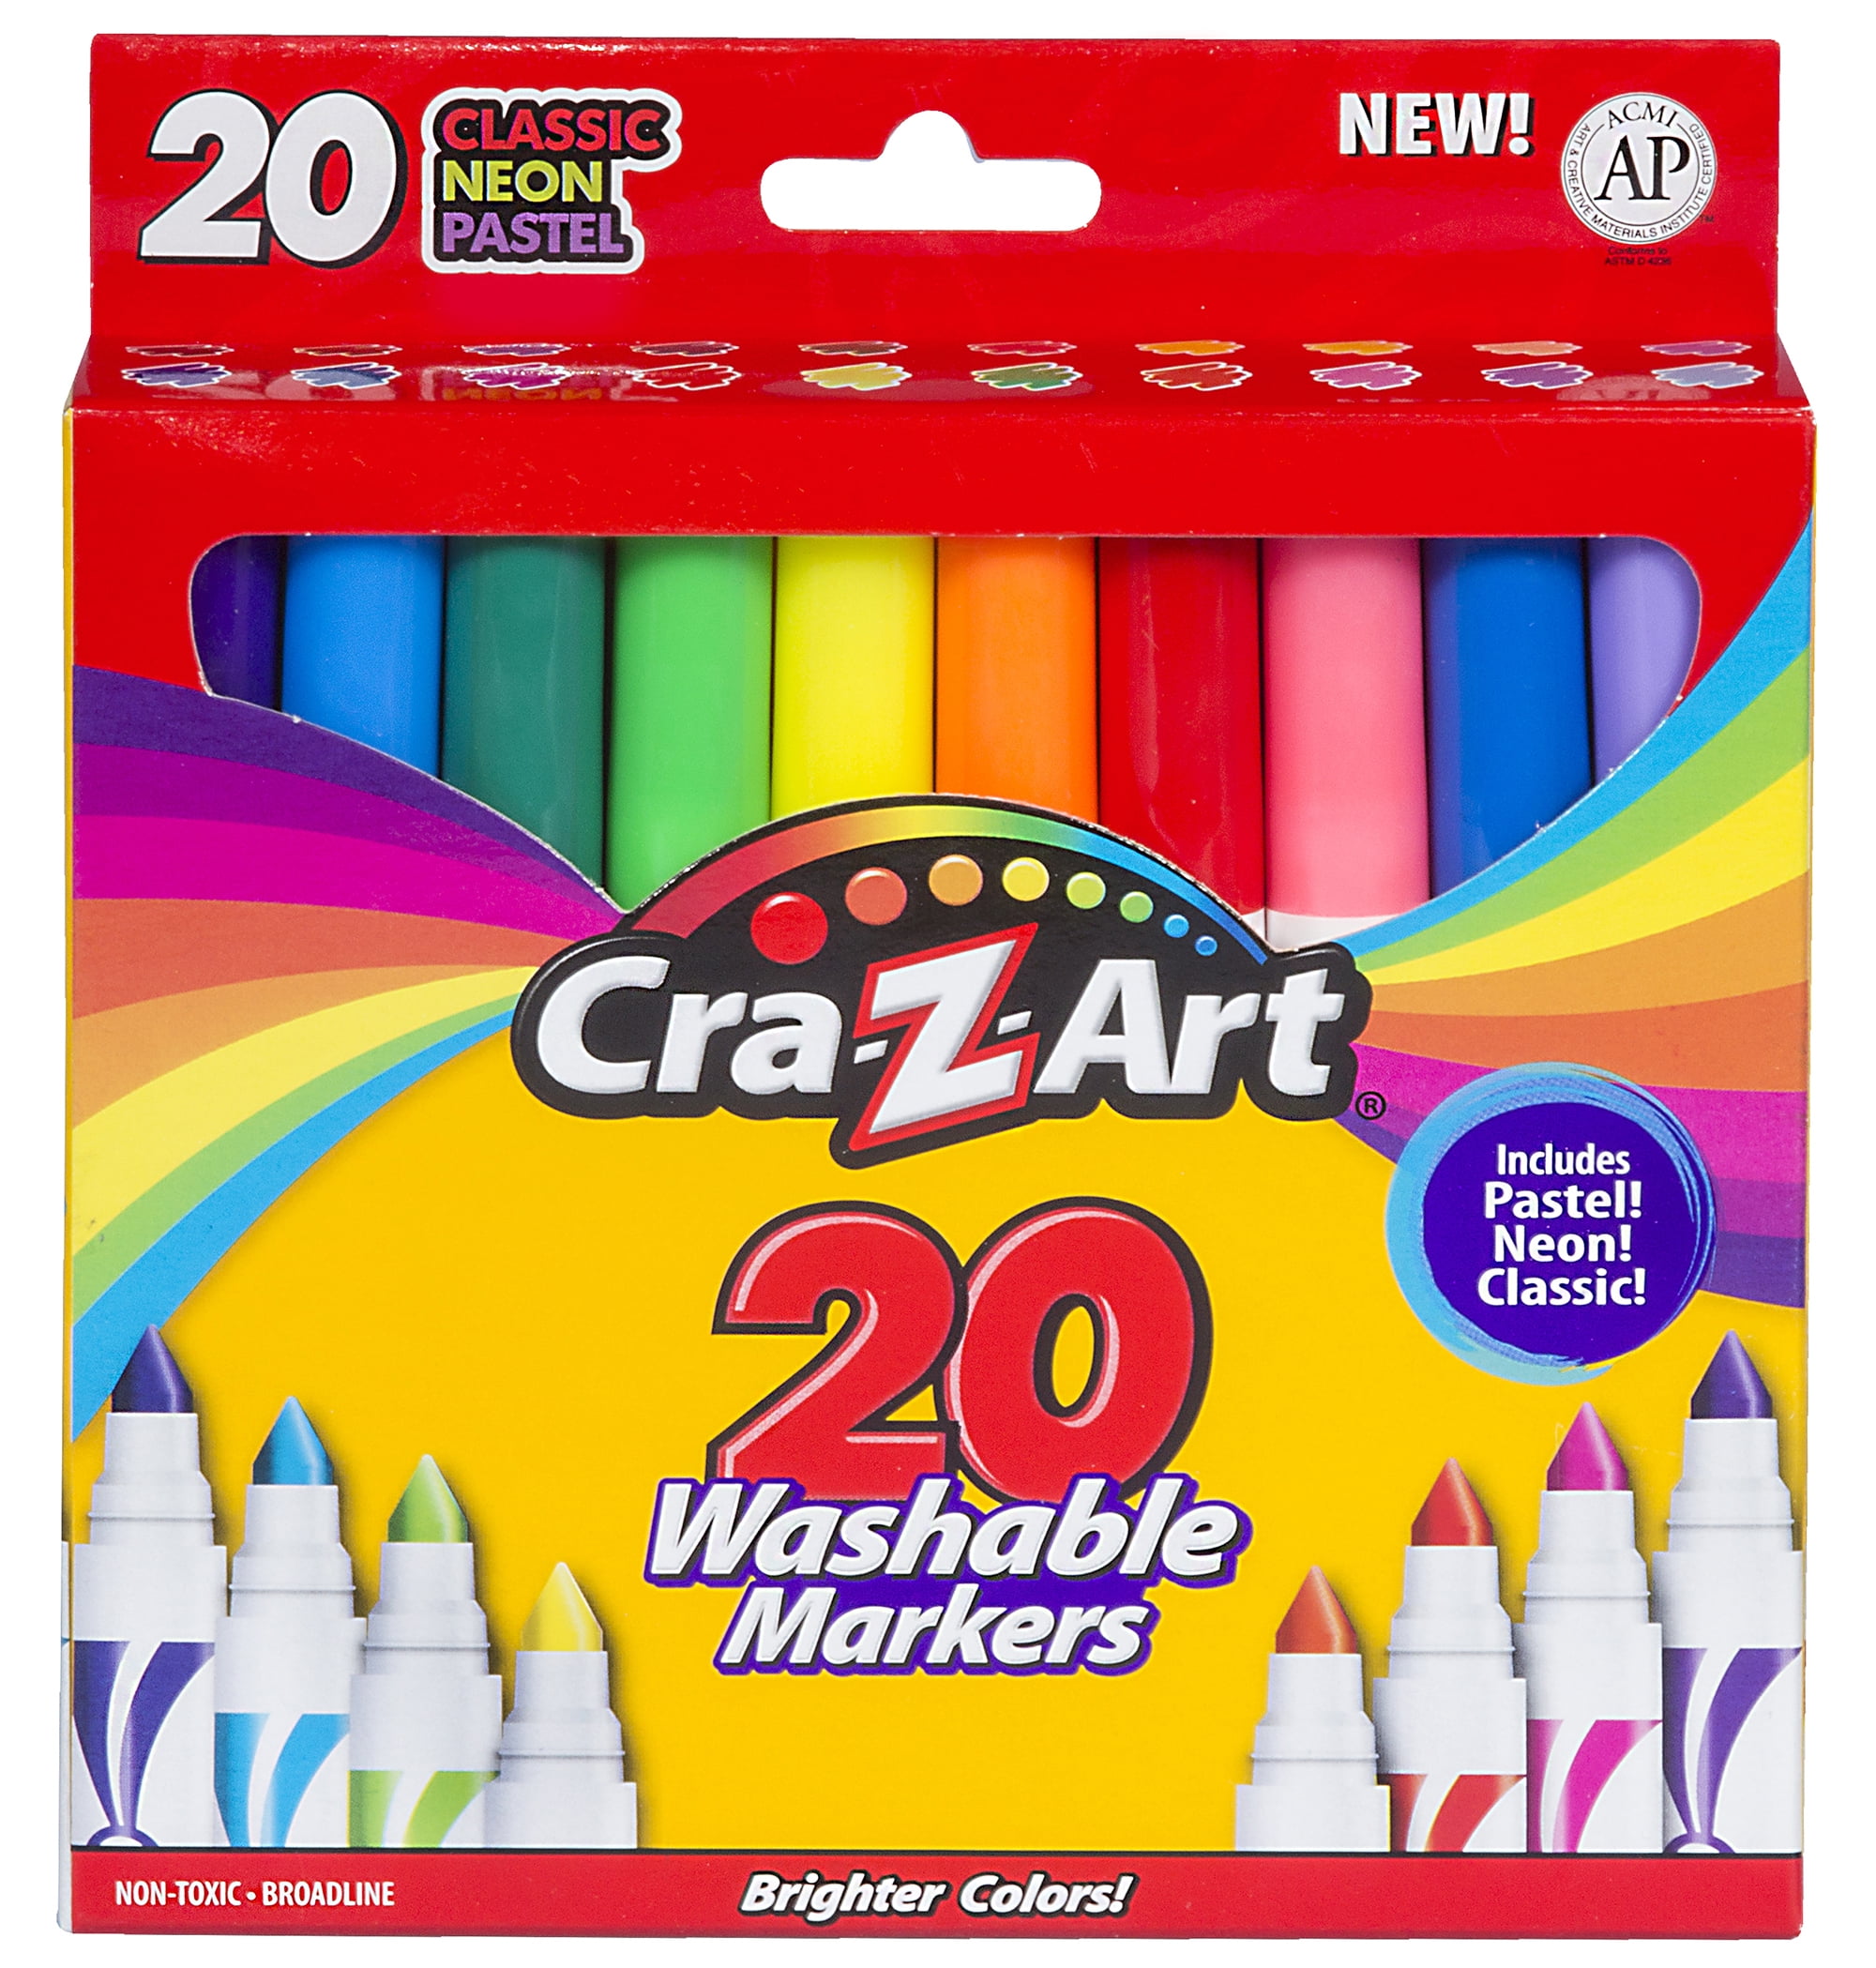 Cra-Z-Art Washable Broadline Markers, 20 Count, Classic, Neon, and Pastel C...